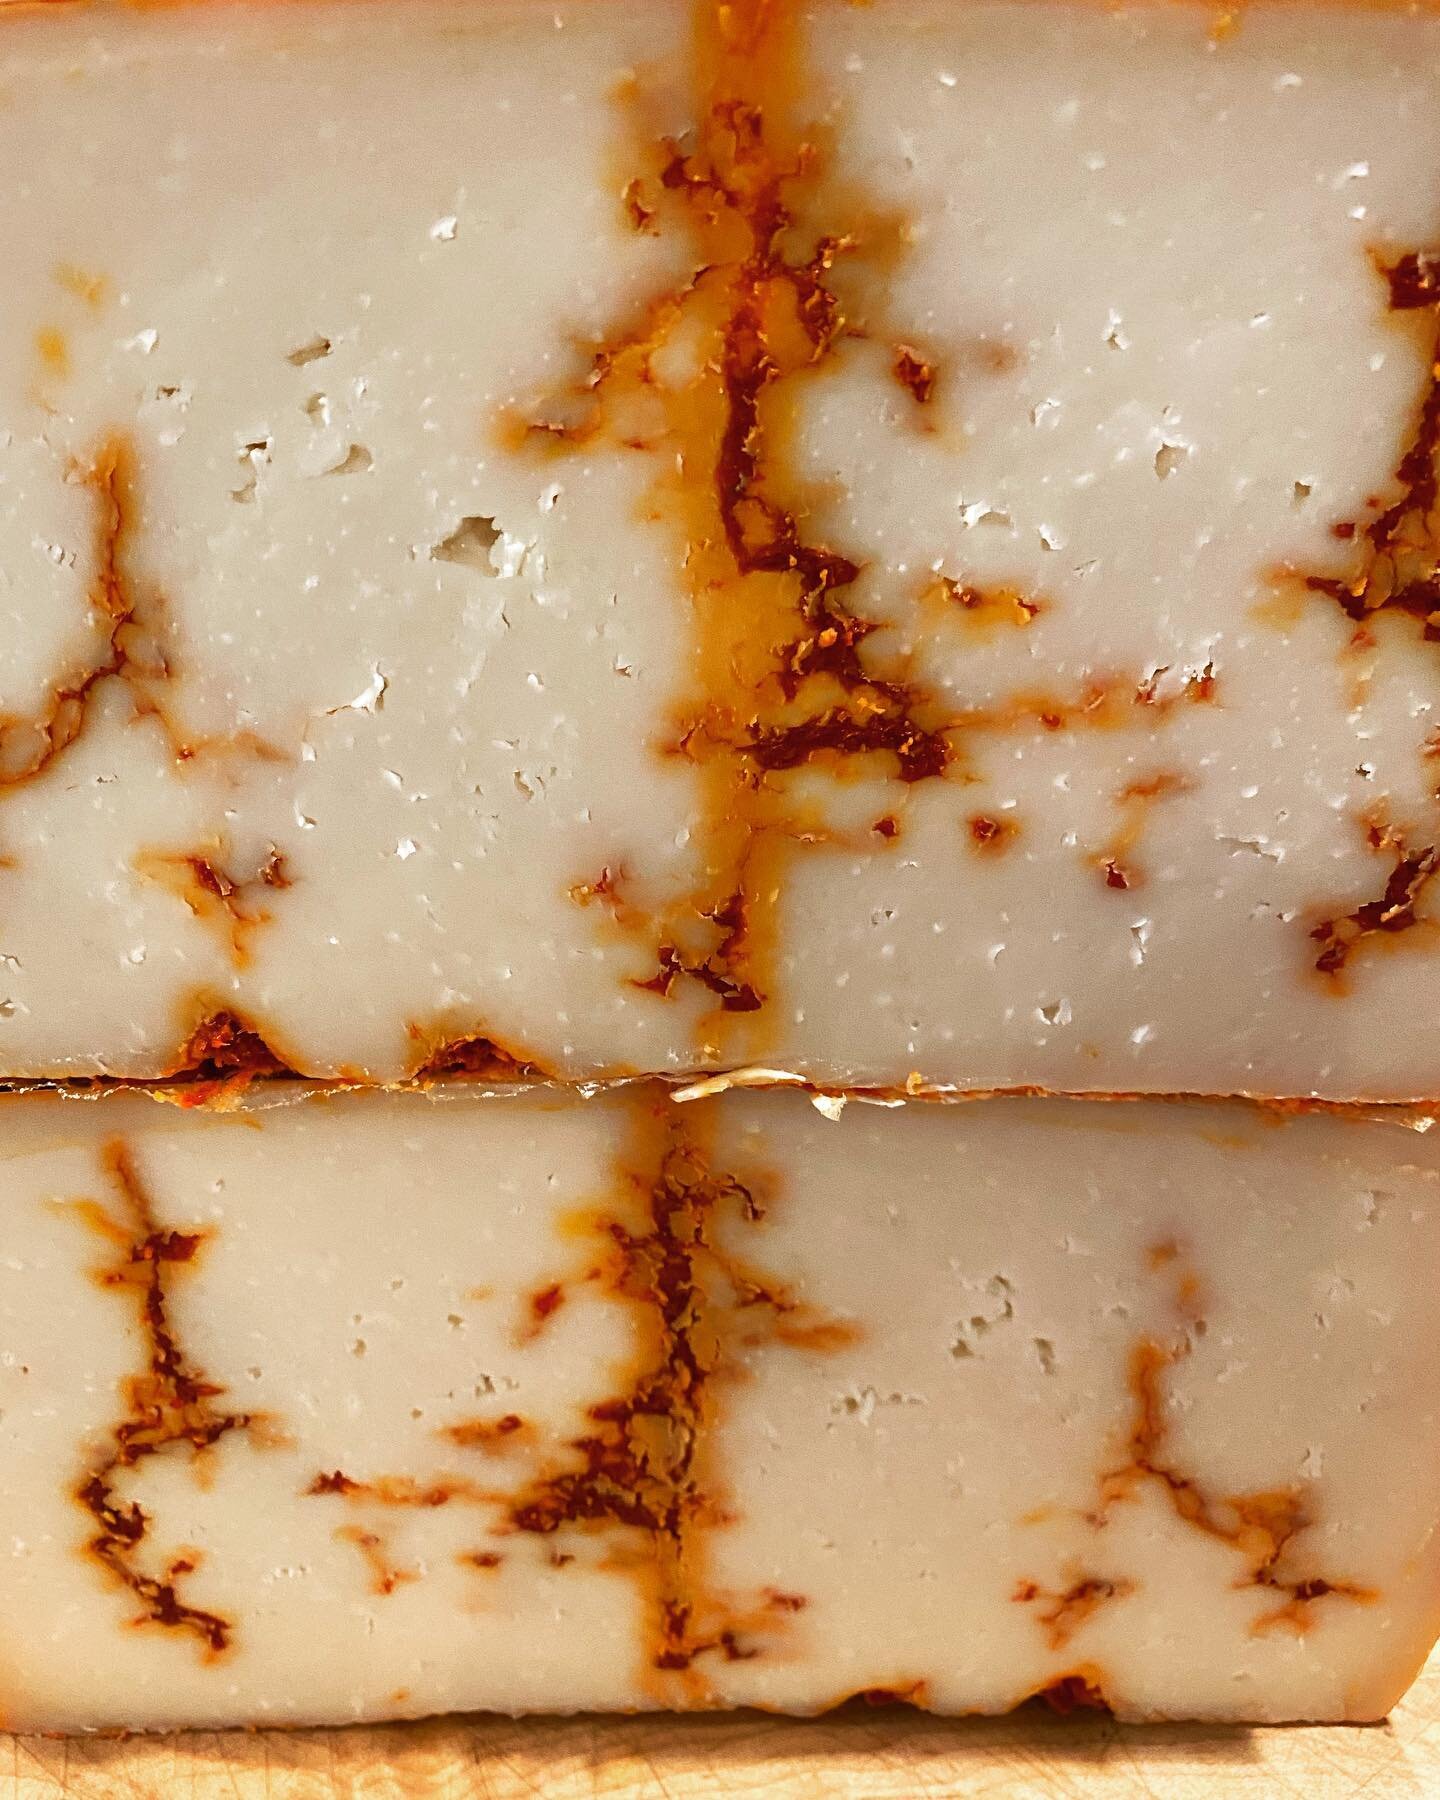 Central Fiore Piccante! For the spicy cheese lover. From Sardinia this sheep milk cheese has veins of hot peppers. 🔥🔥🔥#cheese #cheeselover #spicy #spicyfood #sardinia #sheepsmilk #goodfood #onfire #shoplocal #supportlocal #supportsmallbusiness #ho